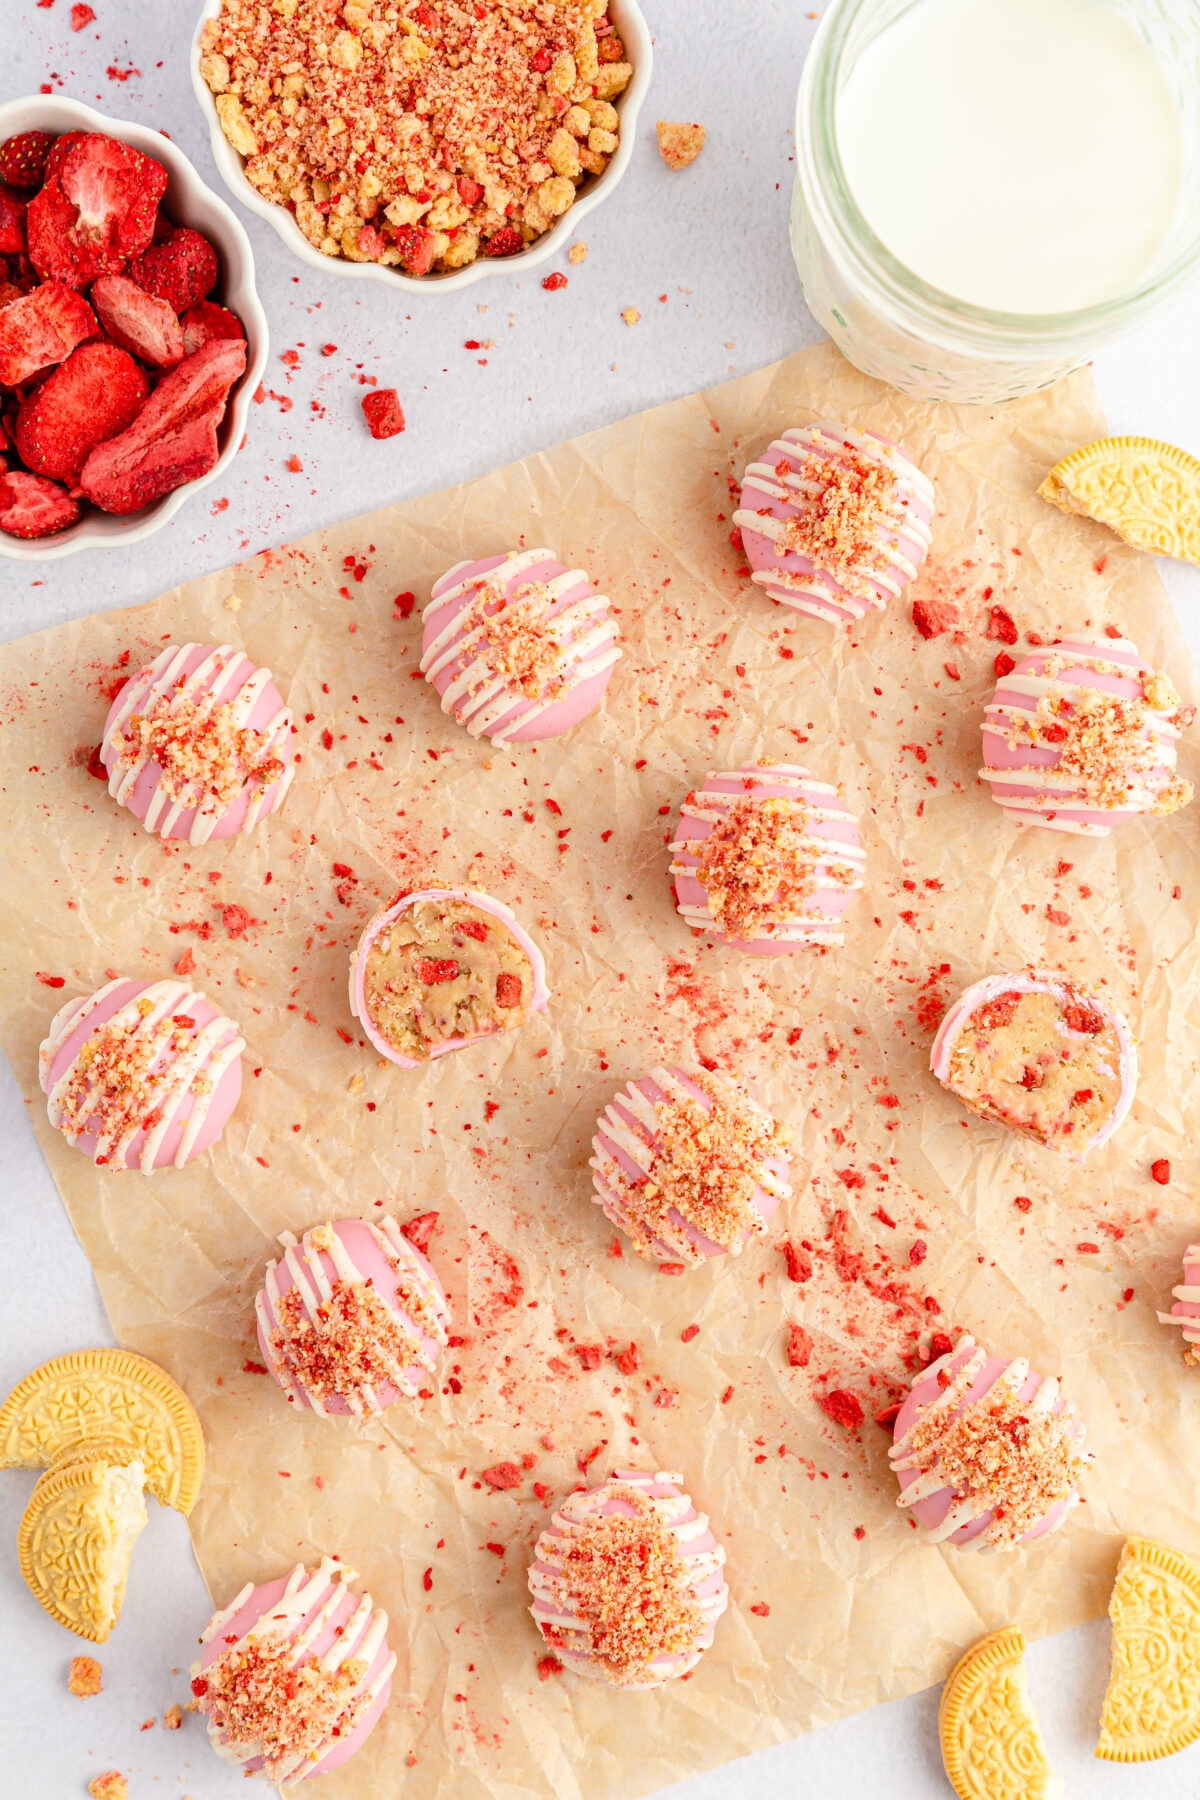 A delicious treat for summer parties, these strawberry shortcake Oreo balls combine golden Oreos, freeze-dried strawberries, and cream cheese!